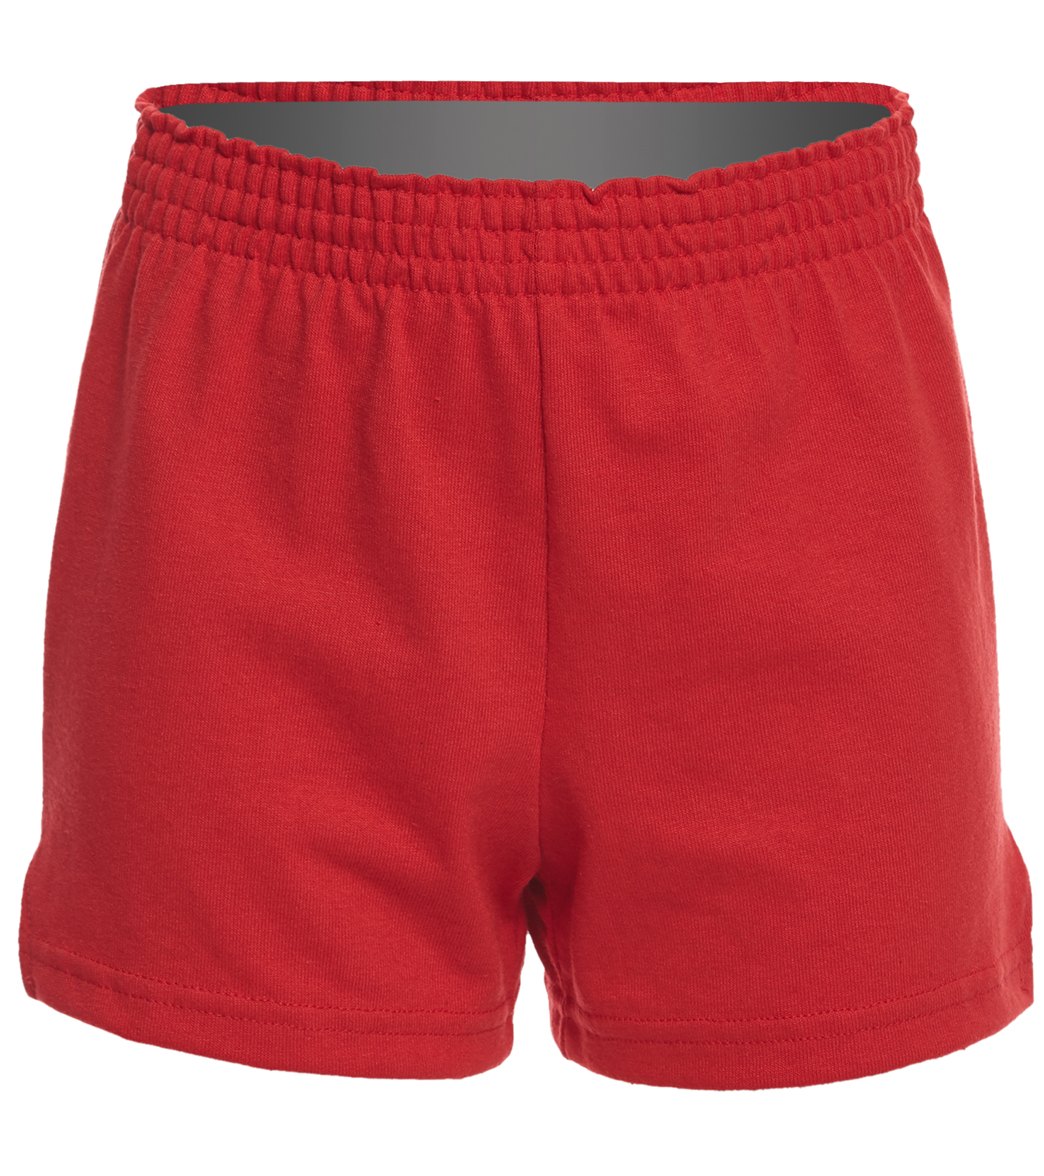 Girls' Fitted Jersey Short - Red X-Small Cotton/Polyester - Swimoutlet.com